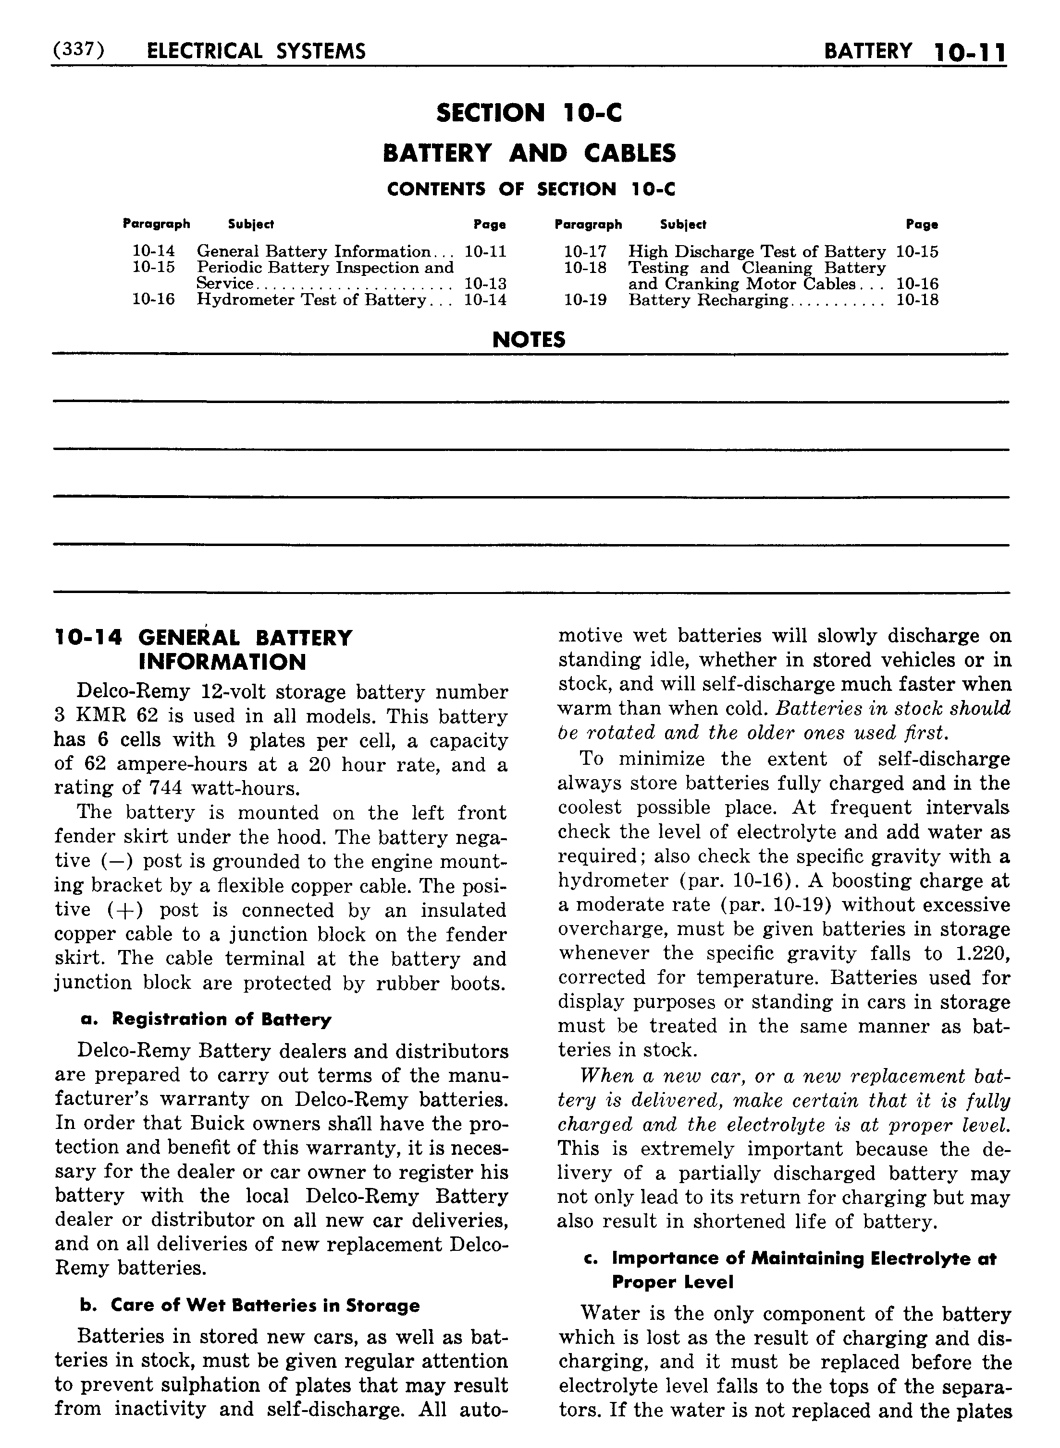 n_11 1956 Buick Shop Manual - Electrical Systems-011-011.jpg